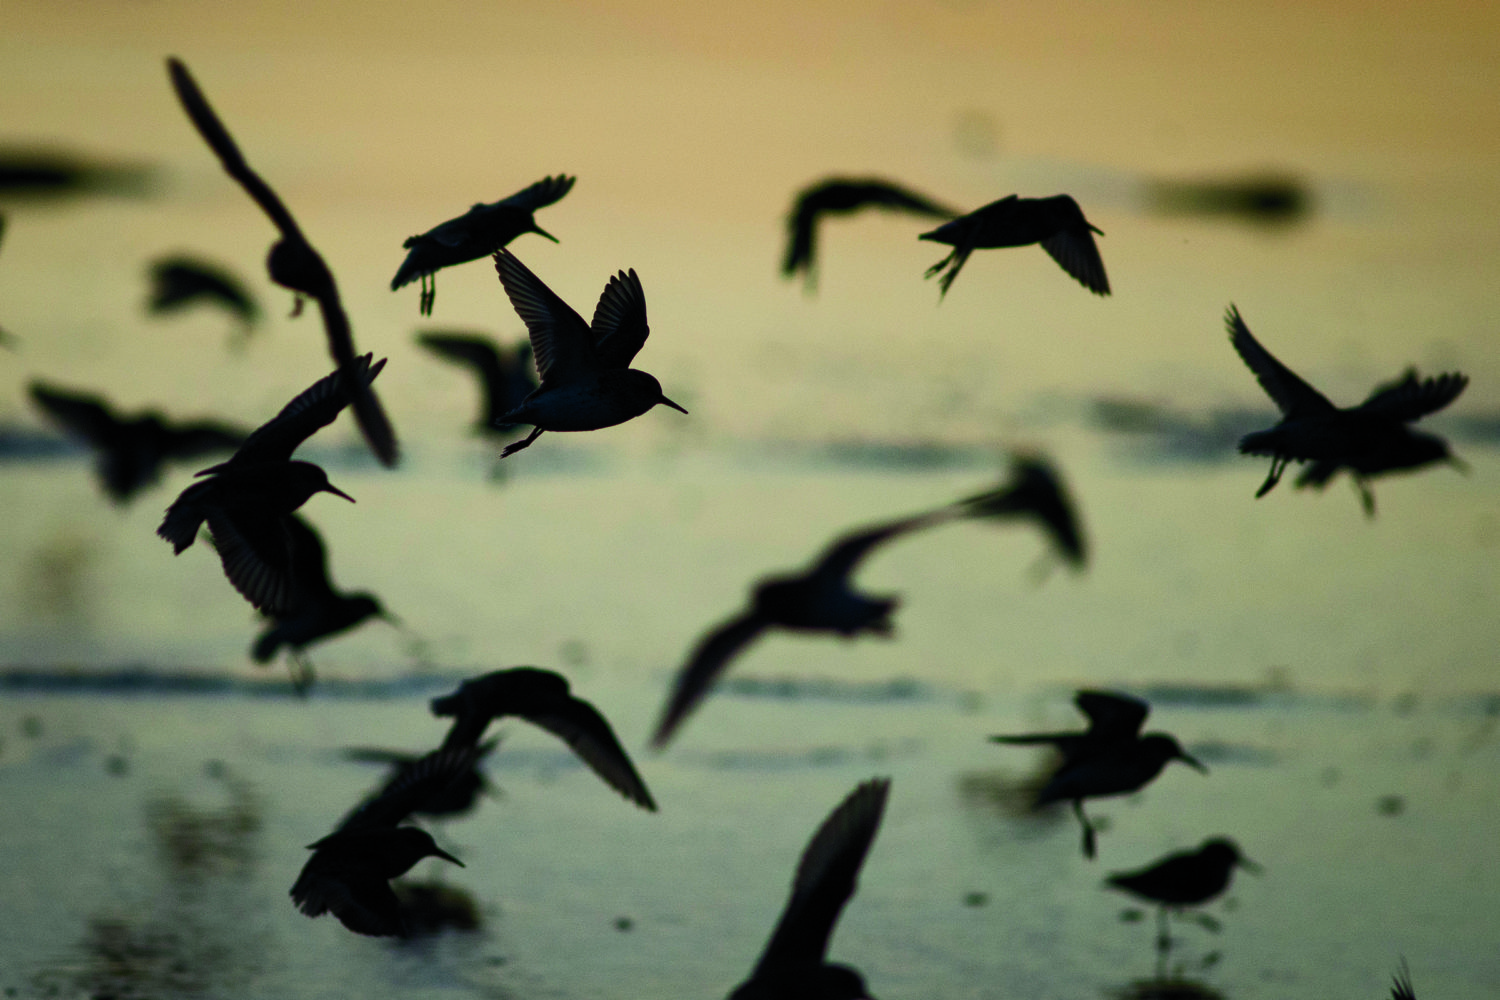 (Aaron Lavinsky | The Daily World) Shorebirds take flight at sunset along the beach in Ocean Shores on Wednesday, April 30, 2014.